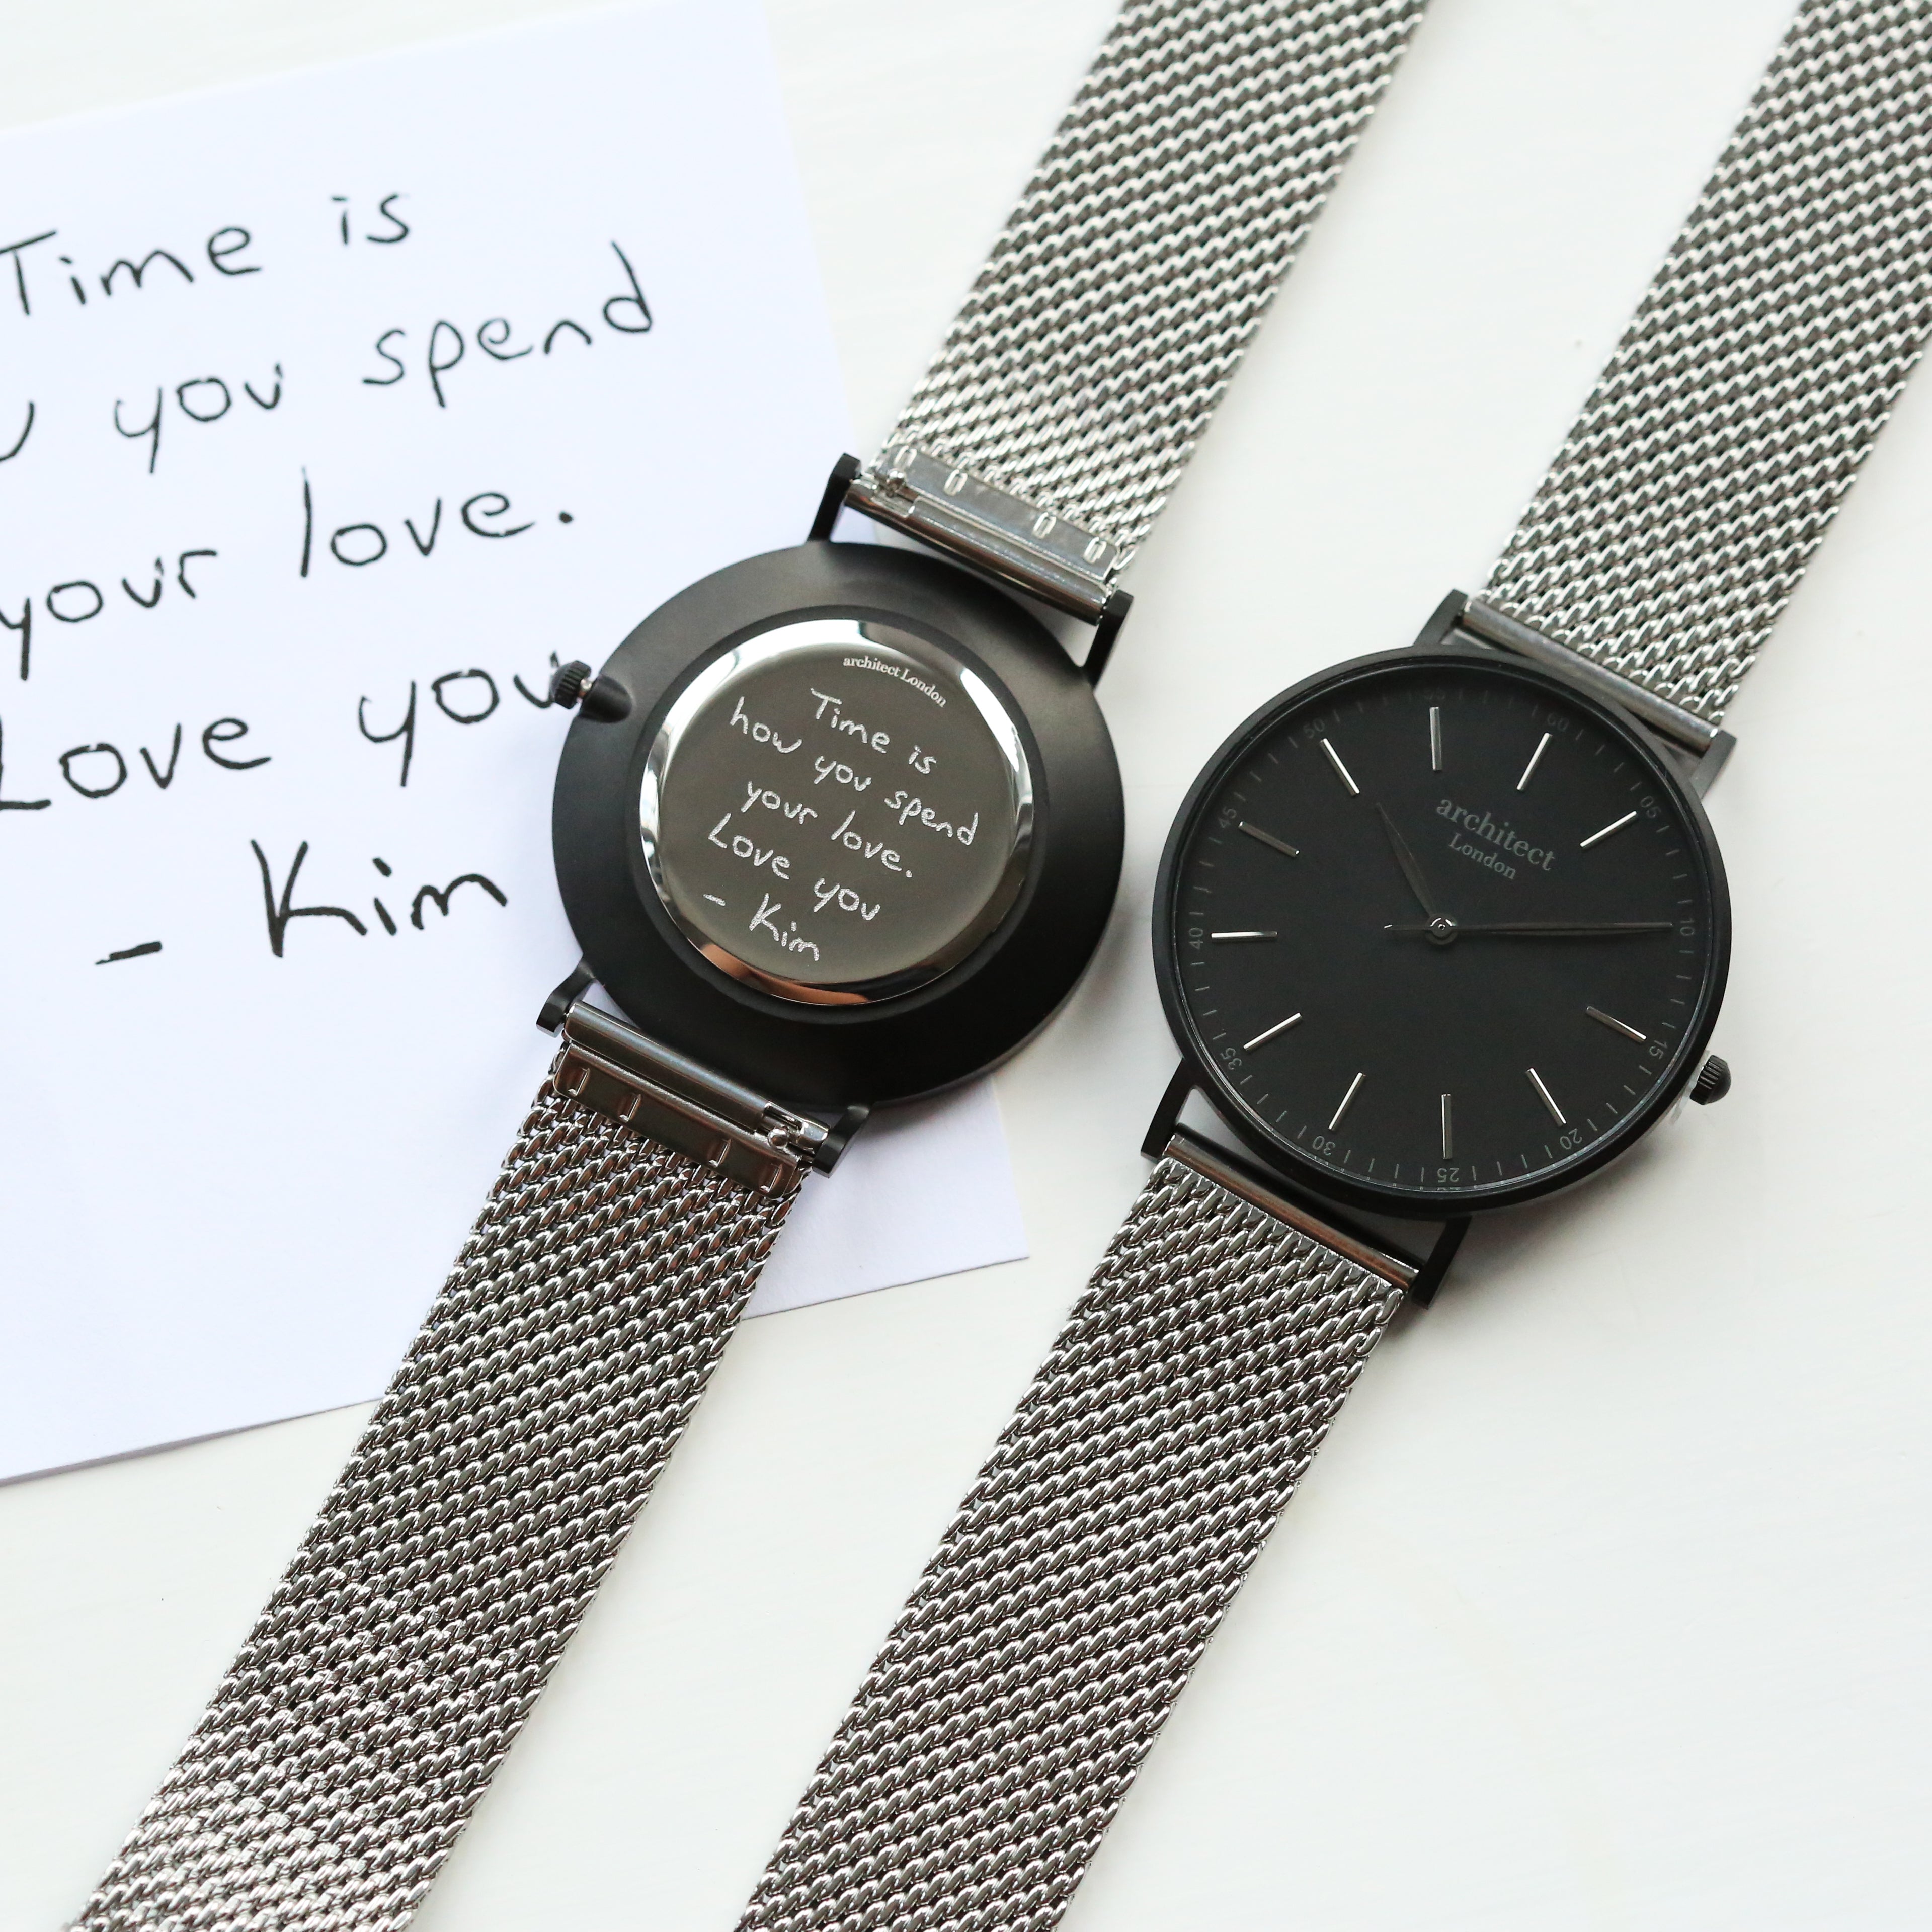 Handwriting Engraved Watches